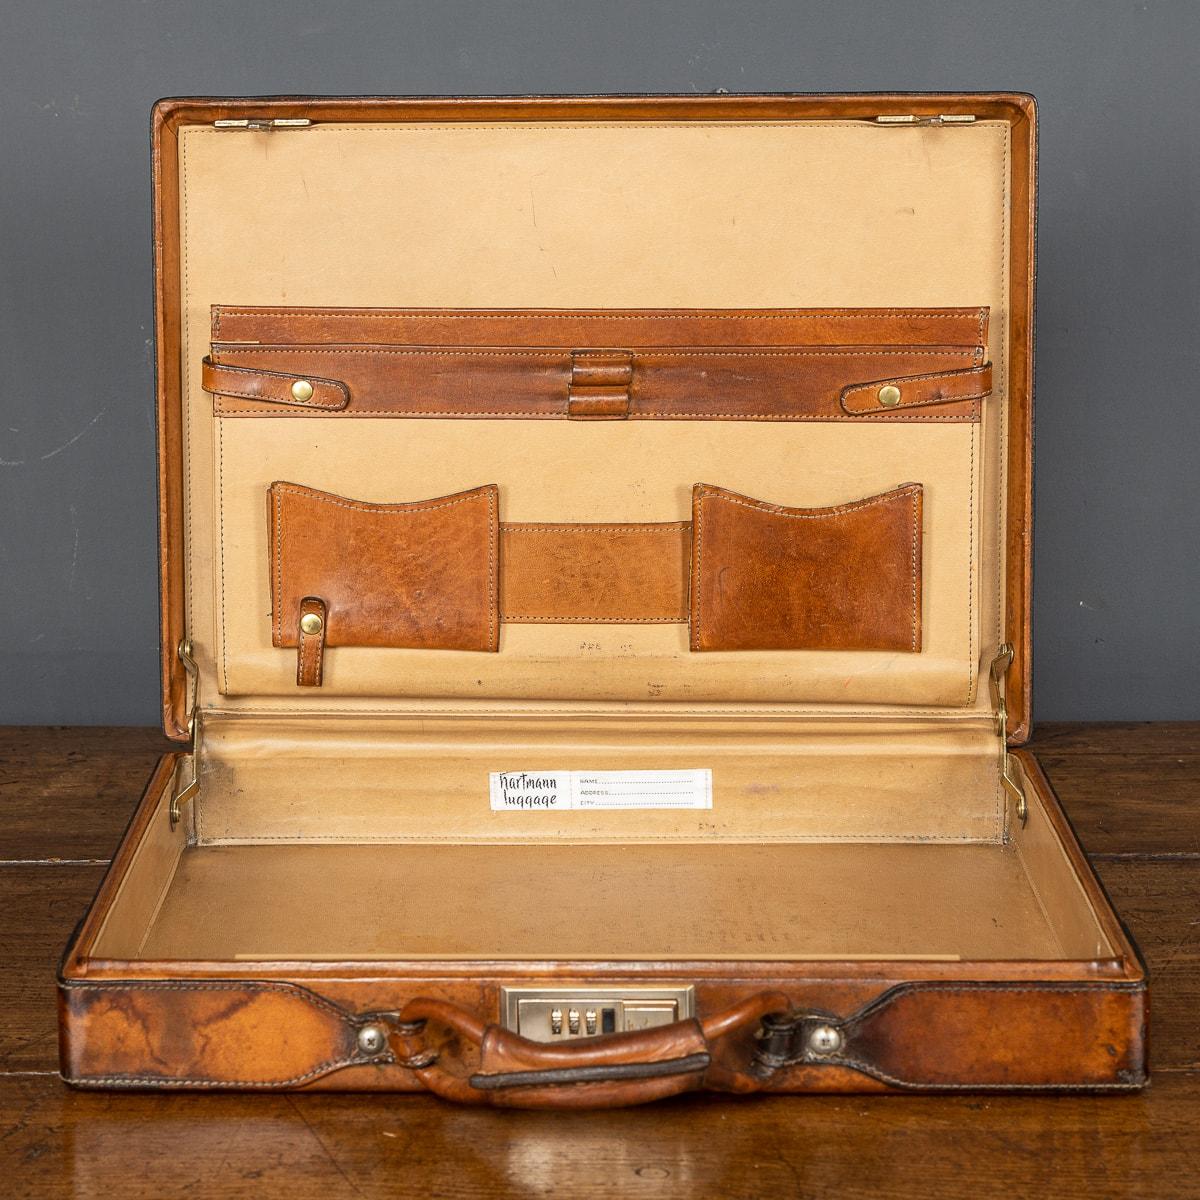 20th Century American Leather Briefcase by Hartmann, circa 1920 In Good Condition For Sale In Royal Tunbridge Wells, Kent